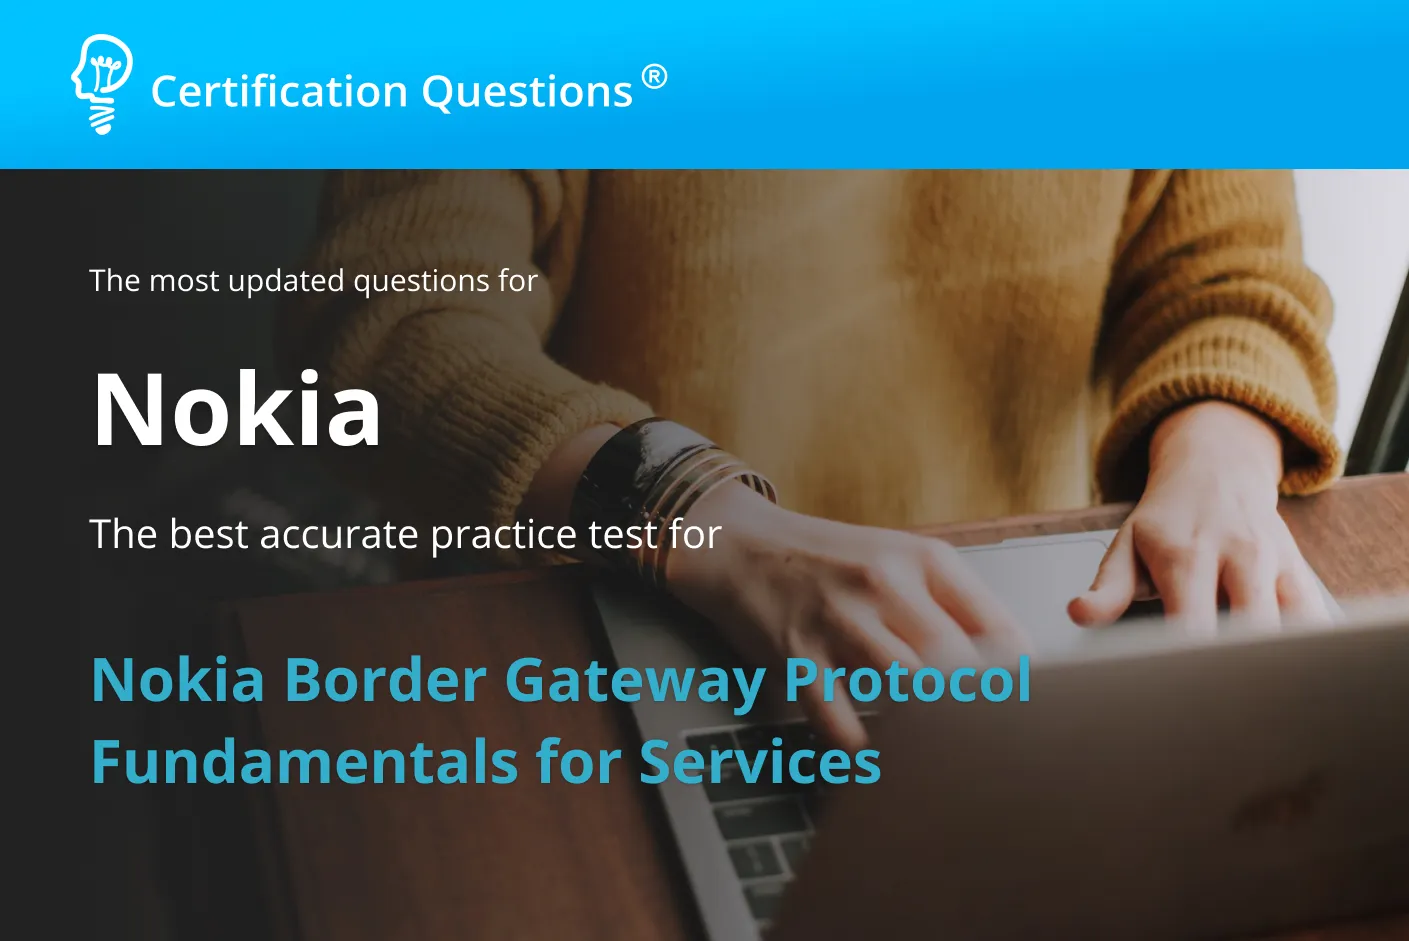 This image is related to the Nokia Border Gateway Protocol Fundamentals for Services Exam